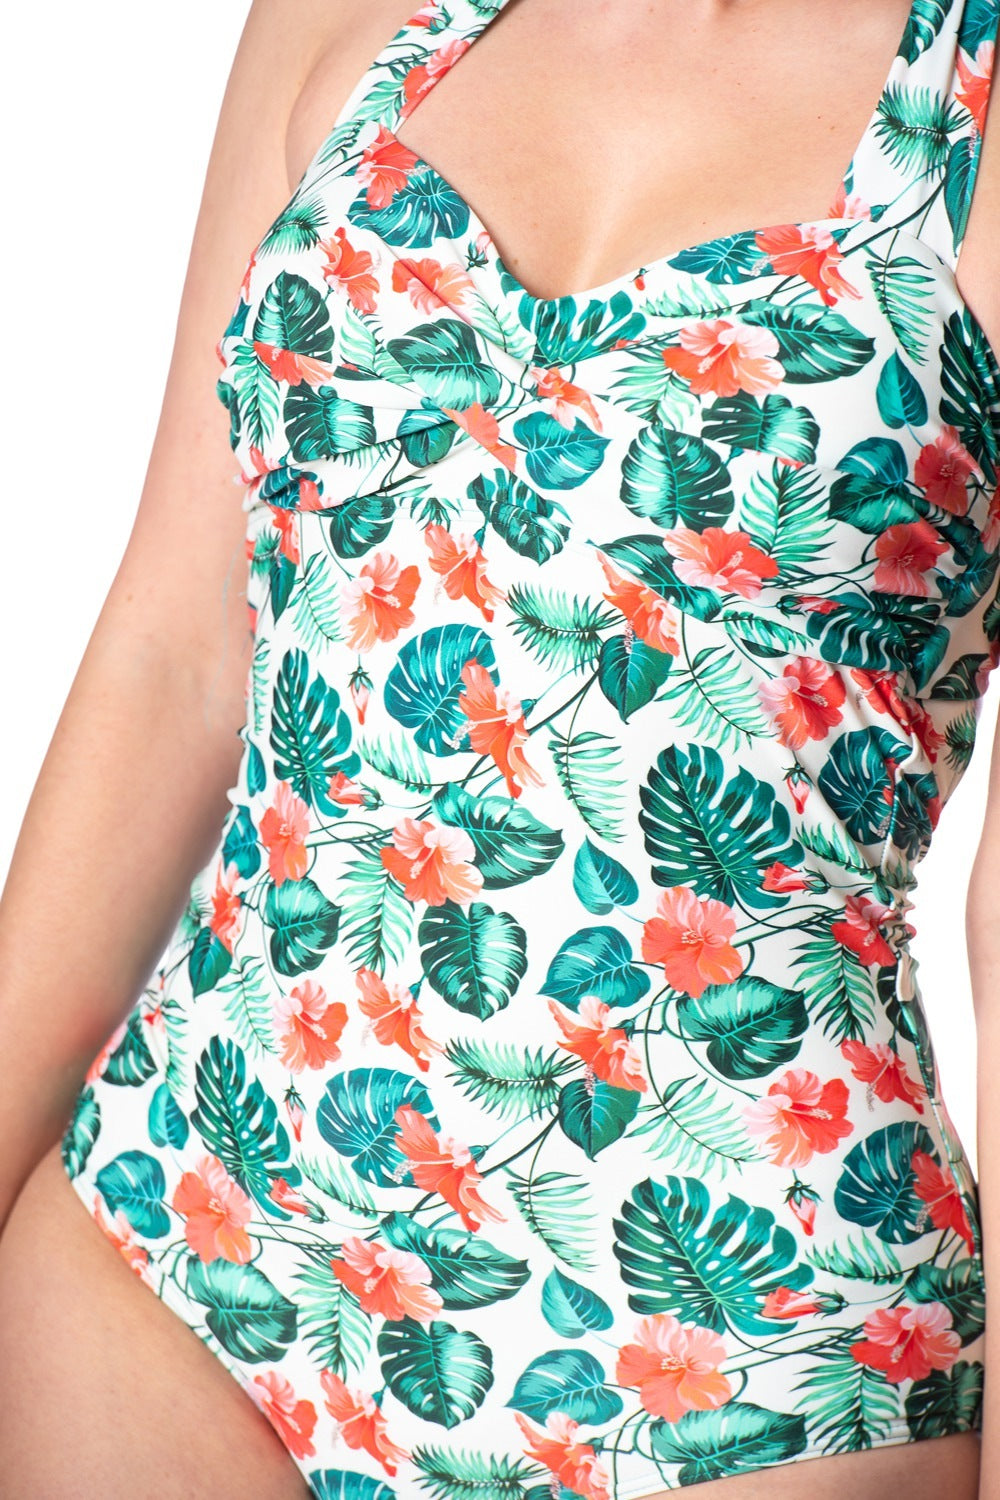 Retro vintage inspired swimsuit with tropical leaves and hibiscus flower pattern all over and ruching details at the bust